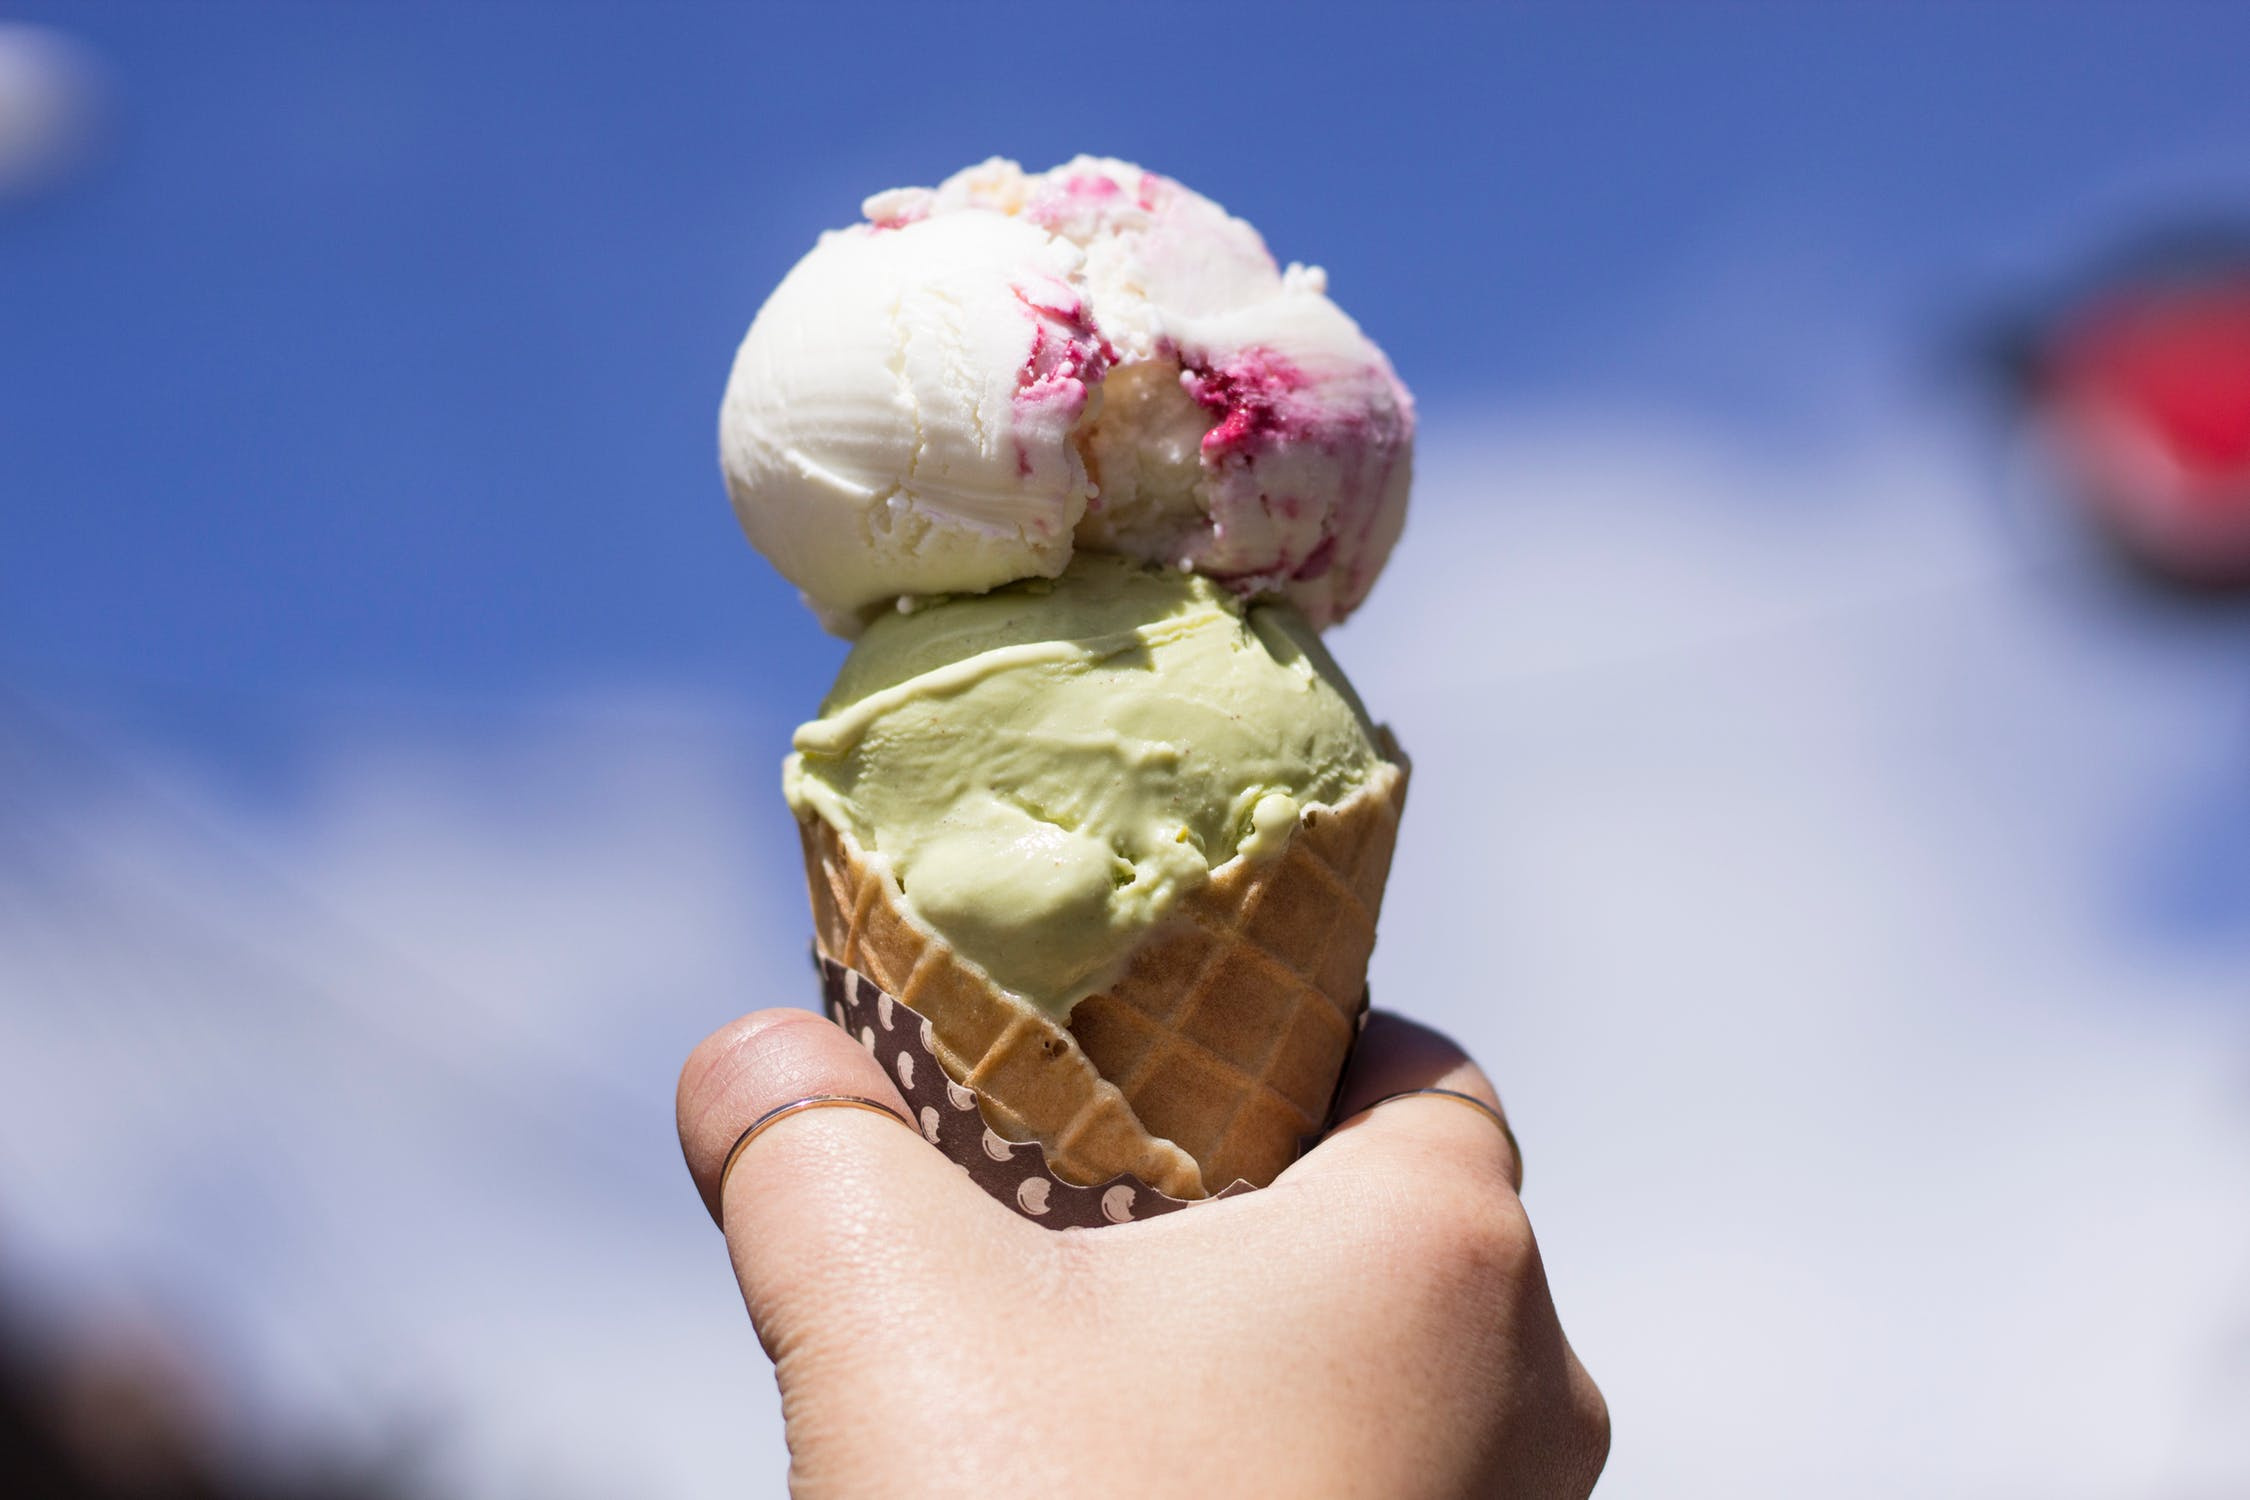 Exceptional Opportunity with this Family Owned Ice Cream Shoppe